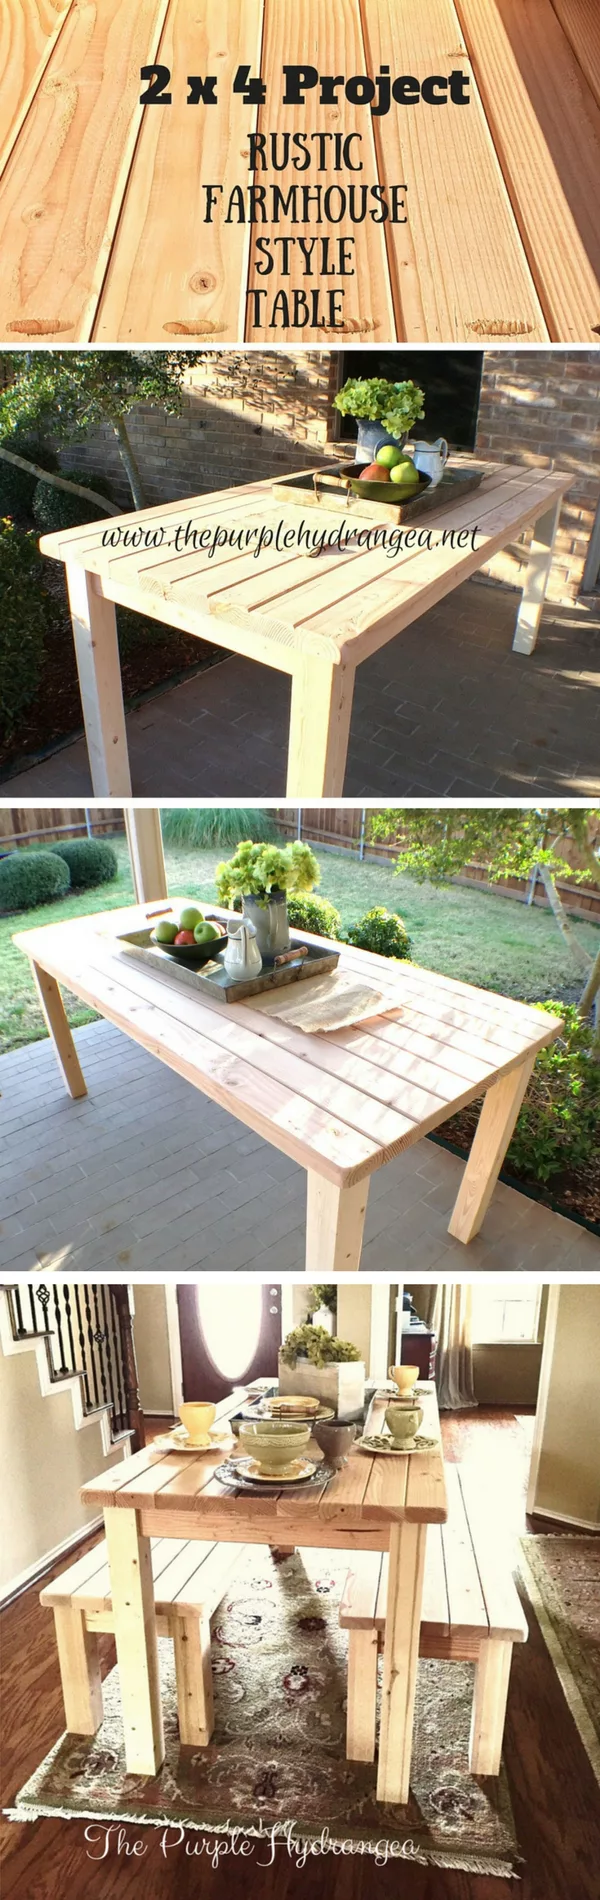 20 Crafty 2x4 DIY Projects That You Can Easily Make - Check out how to make a DIY wooden farmhouse table from 2x4s